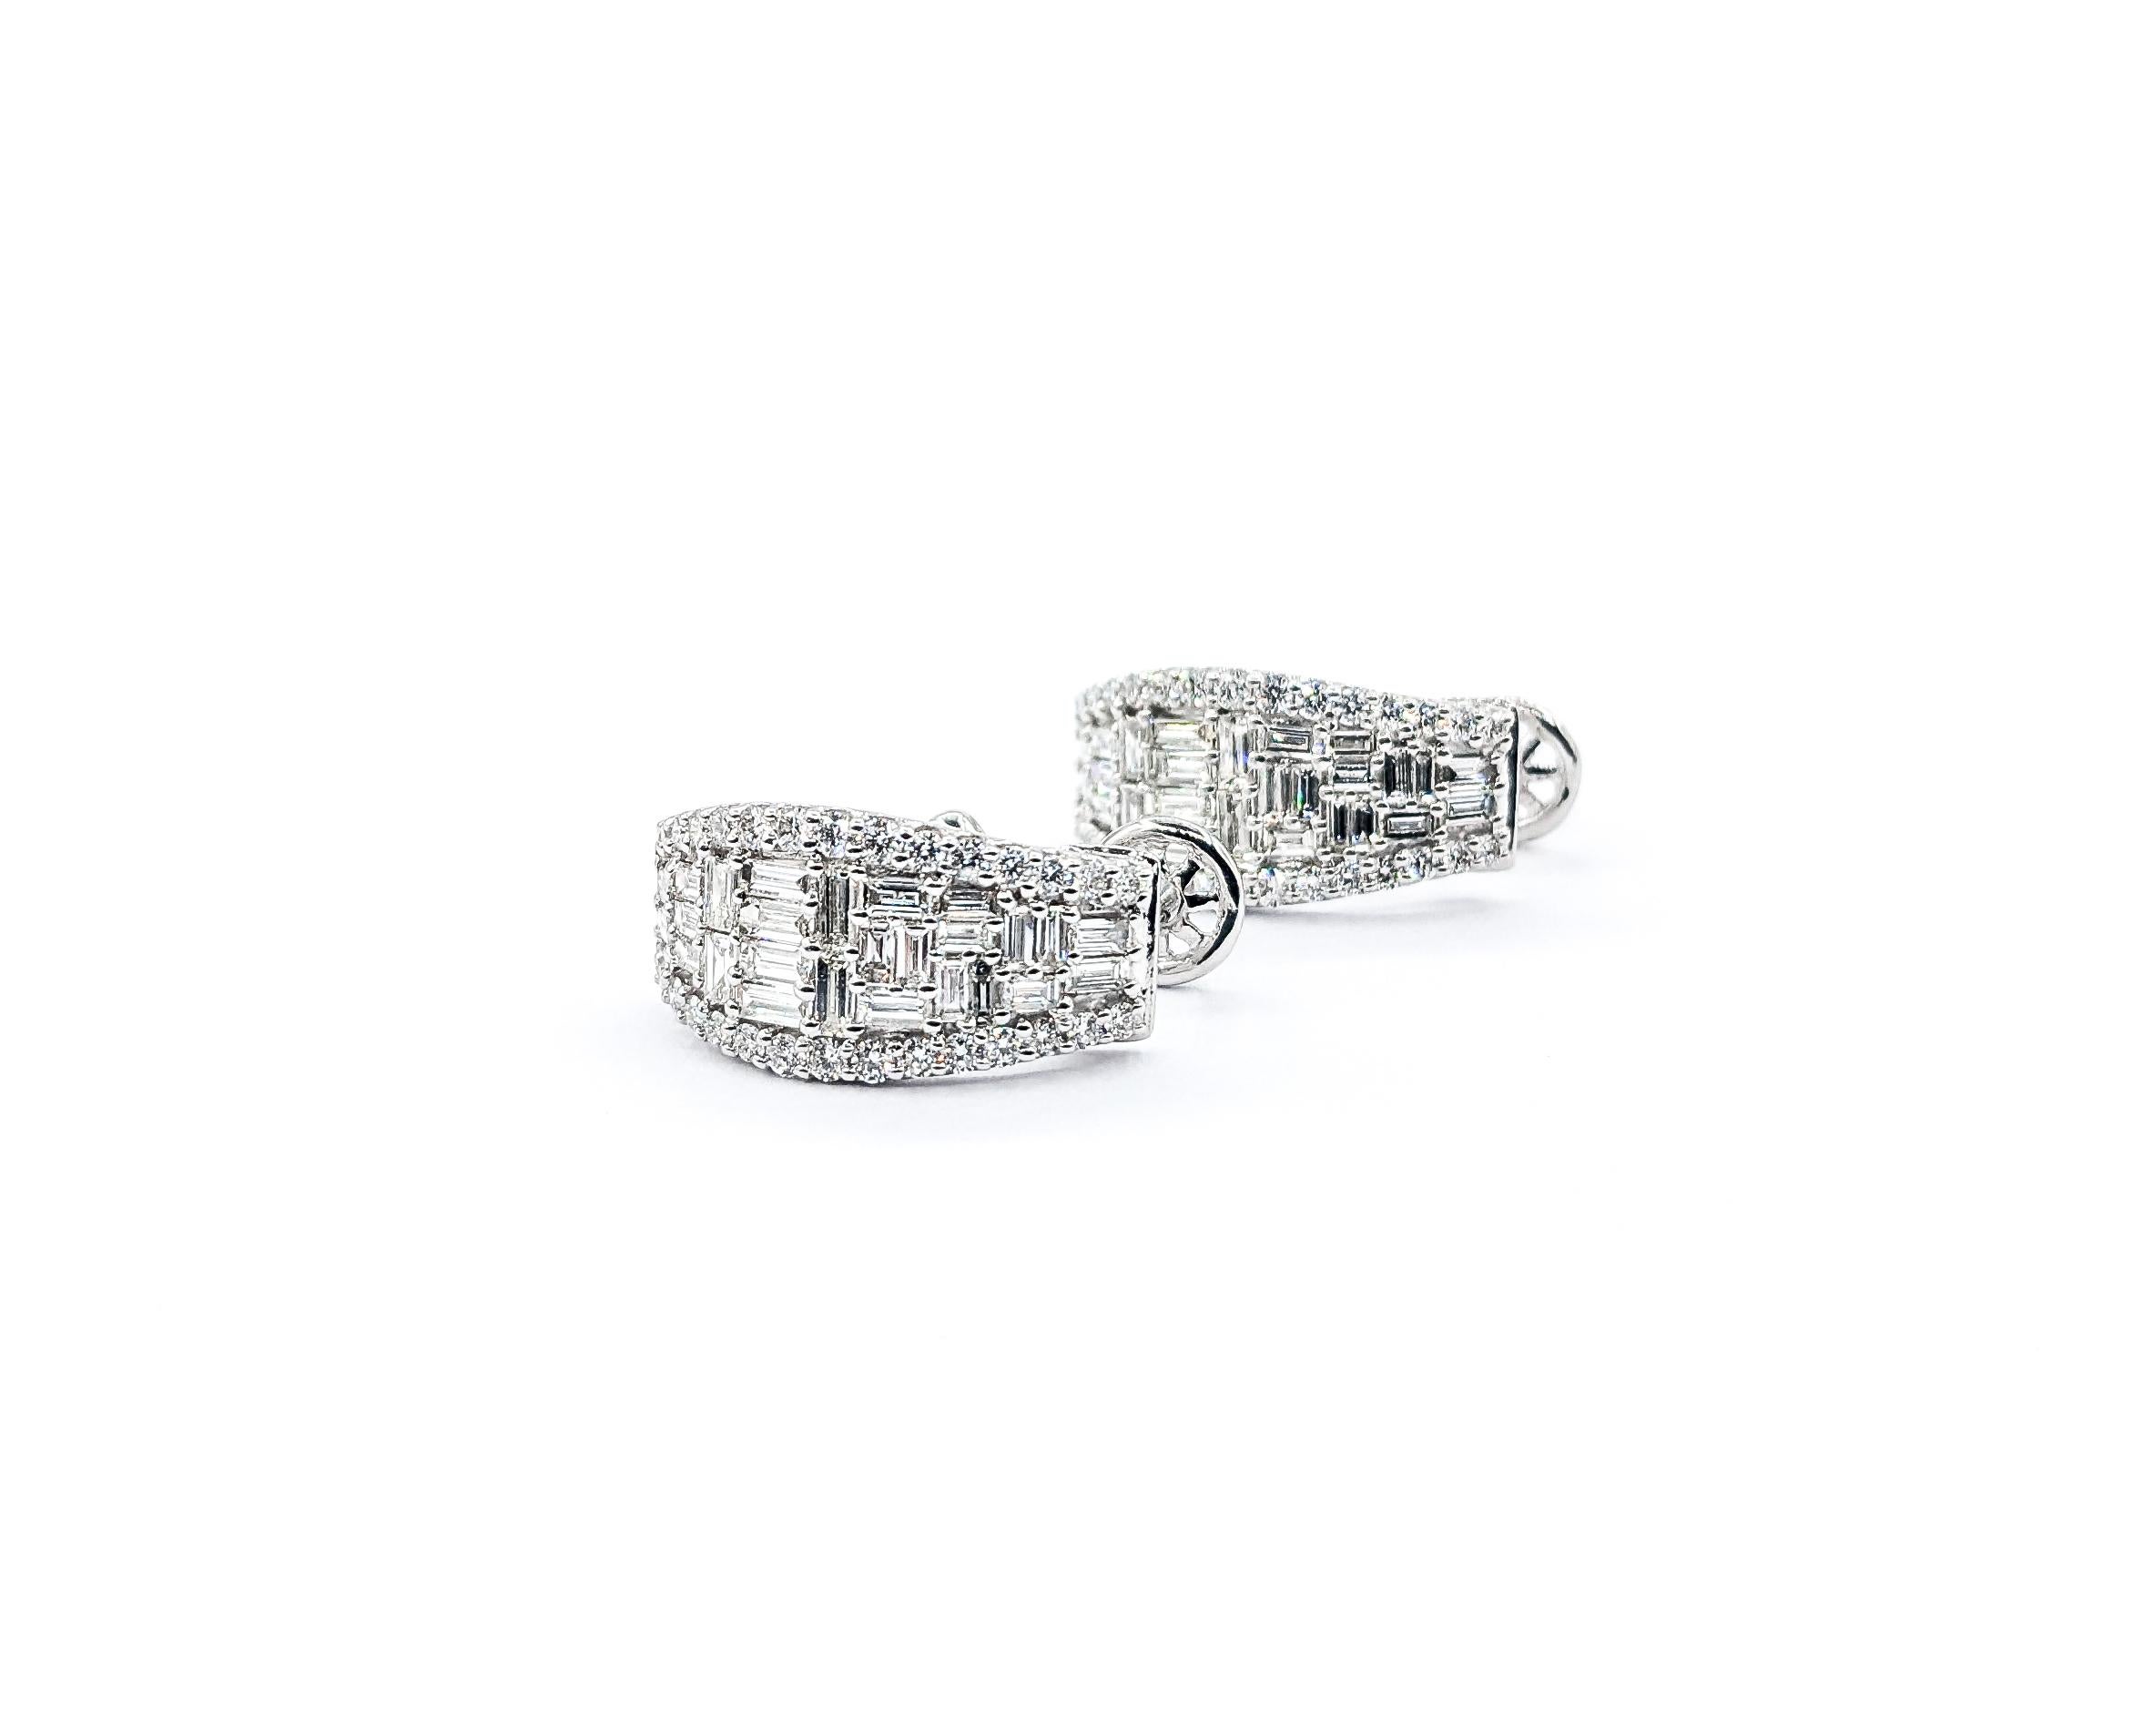 1.97ctw J Hoop Diamond Earrings In White Gold

Unveil the elegance of these Diamond Fashion Earrings, masterfully crafted in 14kt White Gold. Boasting 1.97ctw of SI clarity, near colorless diamonds, these J Hoop earrings blend timeless